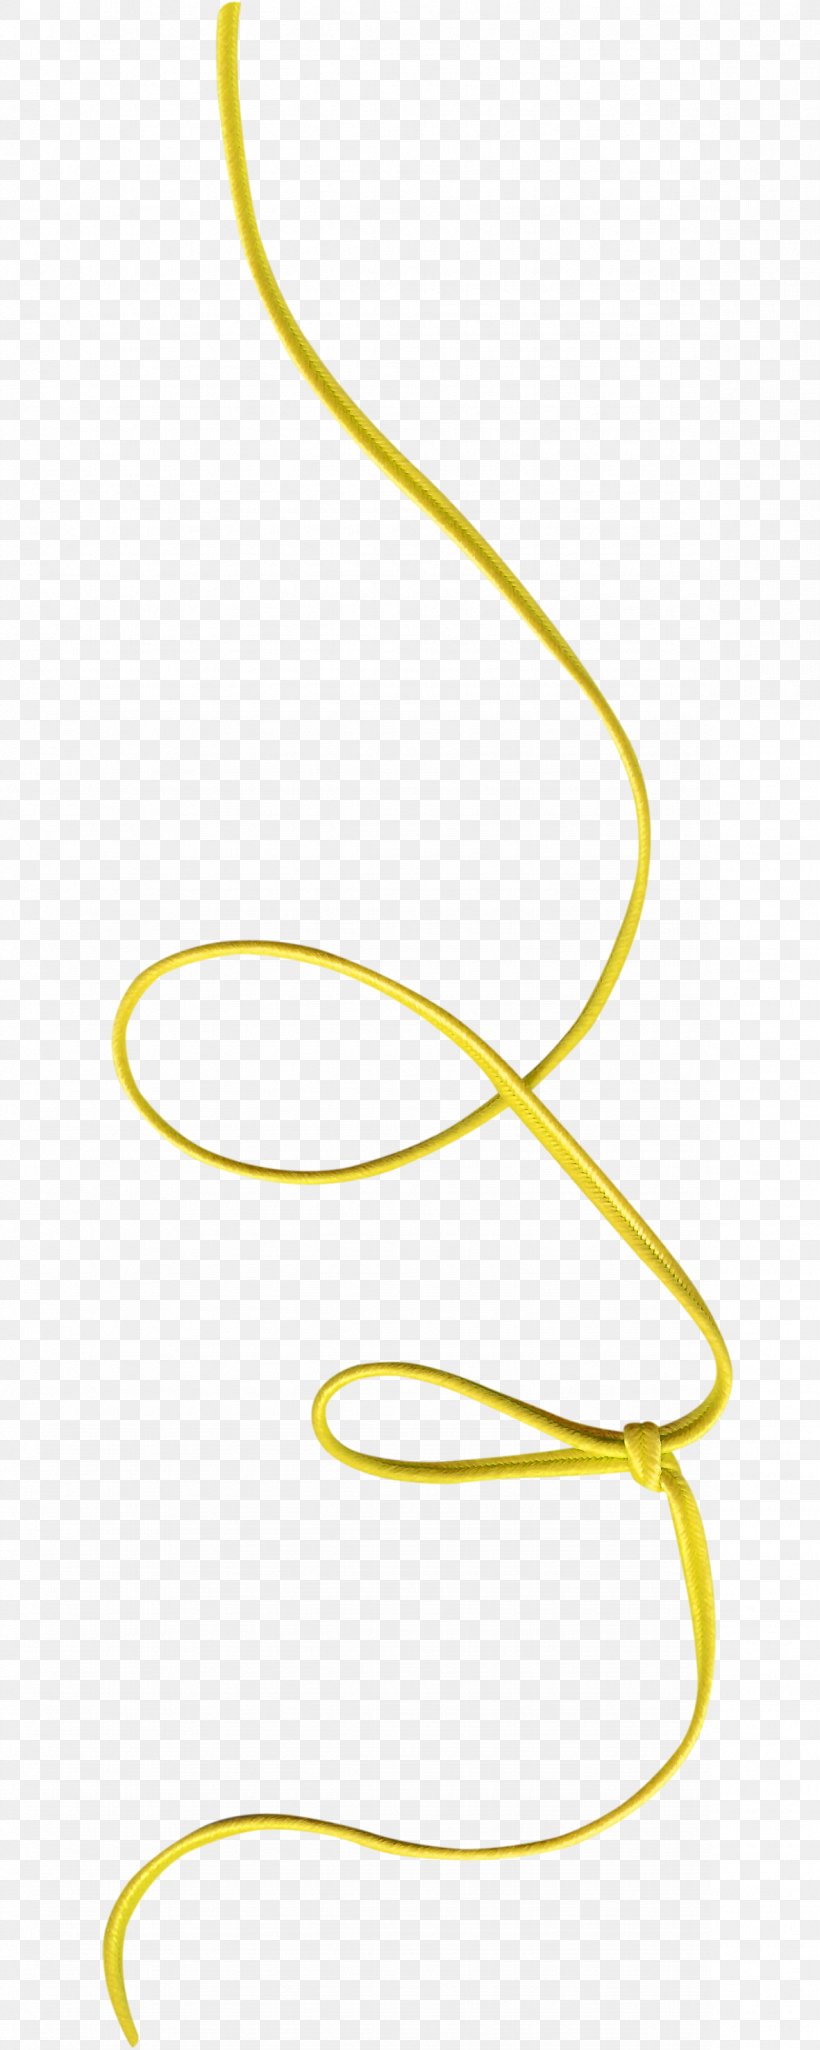 Circle Angle, PNG, 1181x2953px, Material, Yellow Download Free